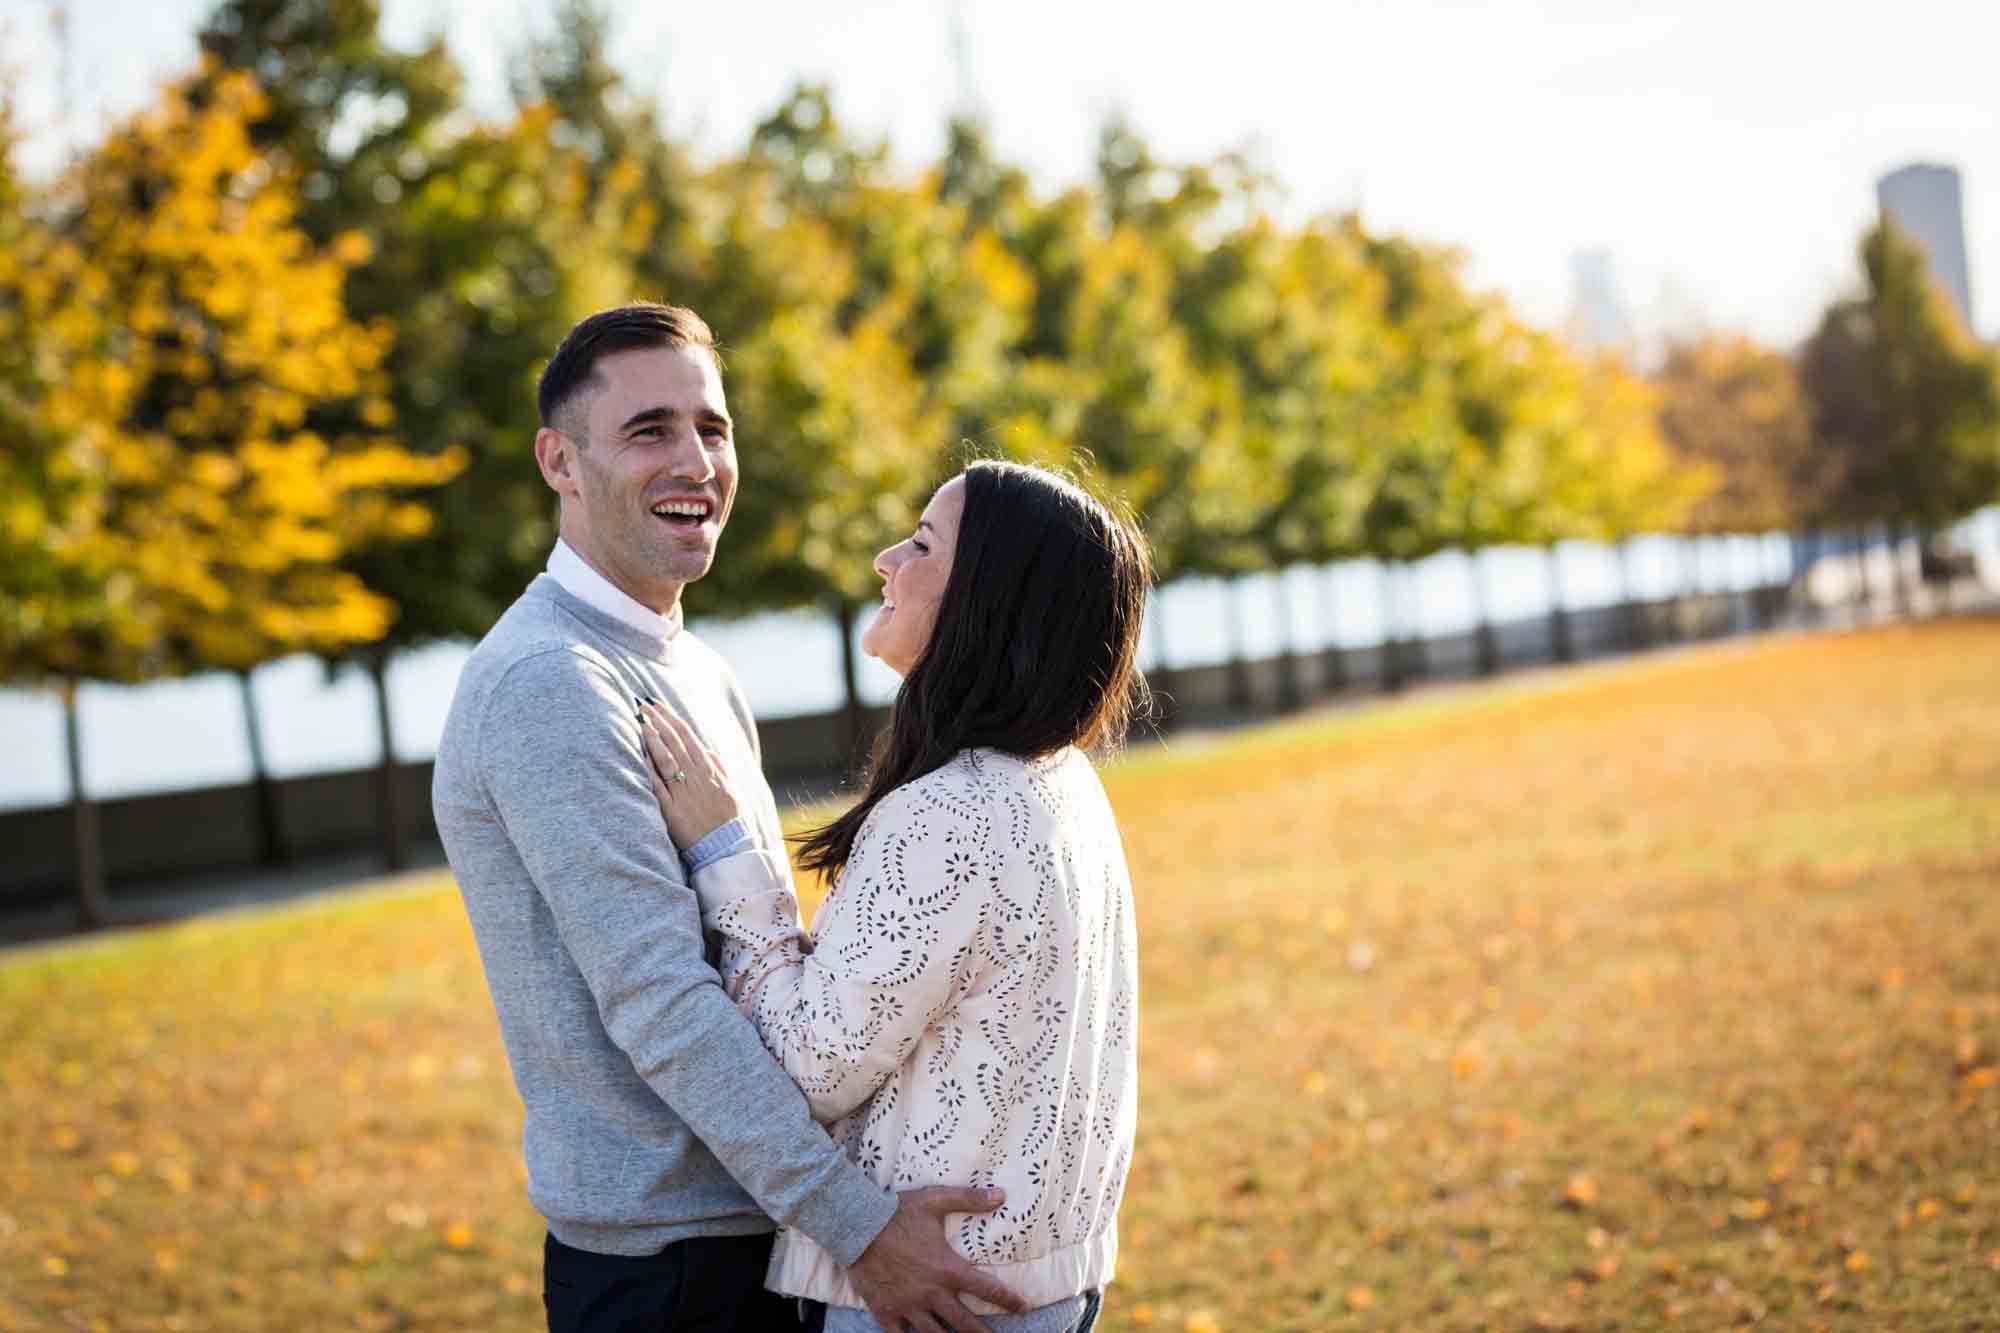 Couple laughing and hugging in front of grass and trees during a Roosevelt Island engagement photo shoot